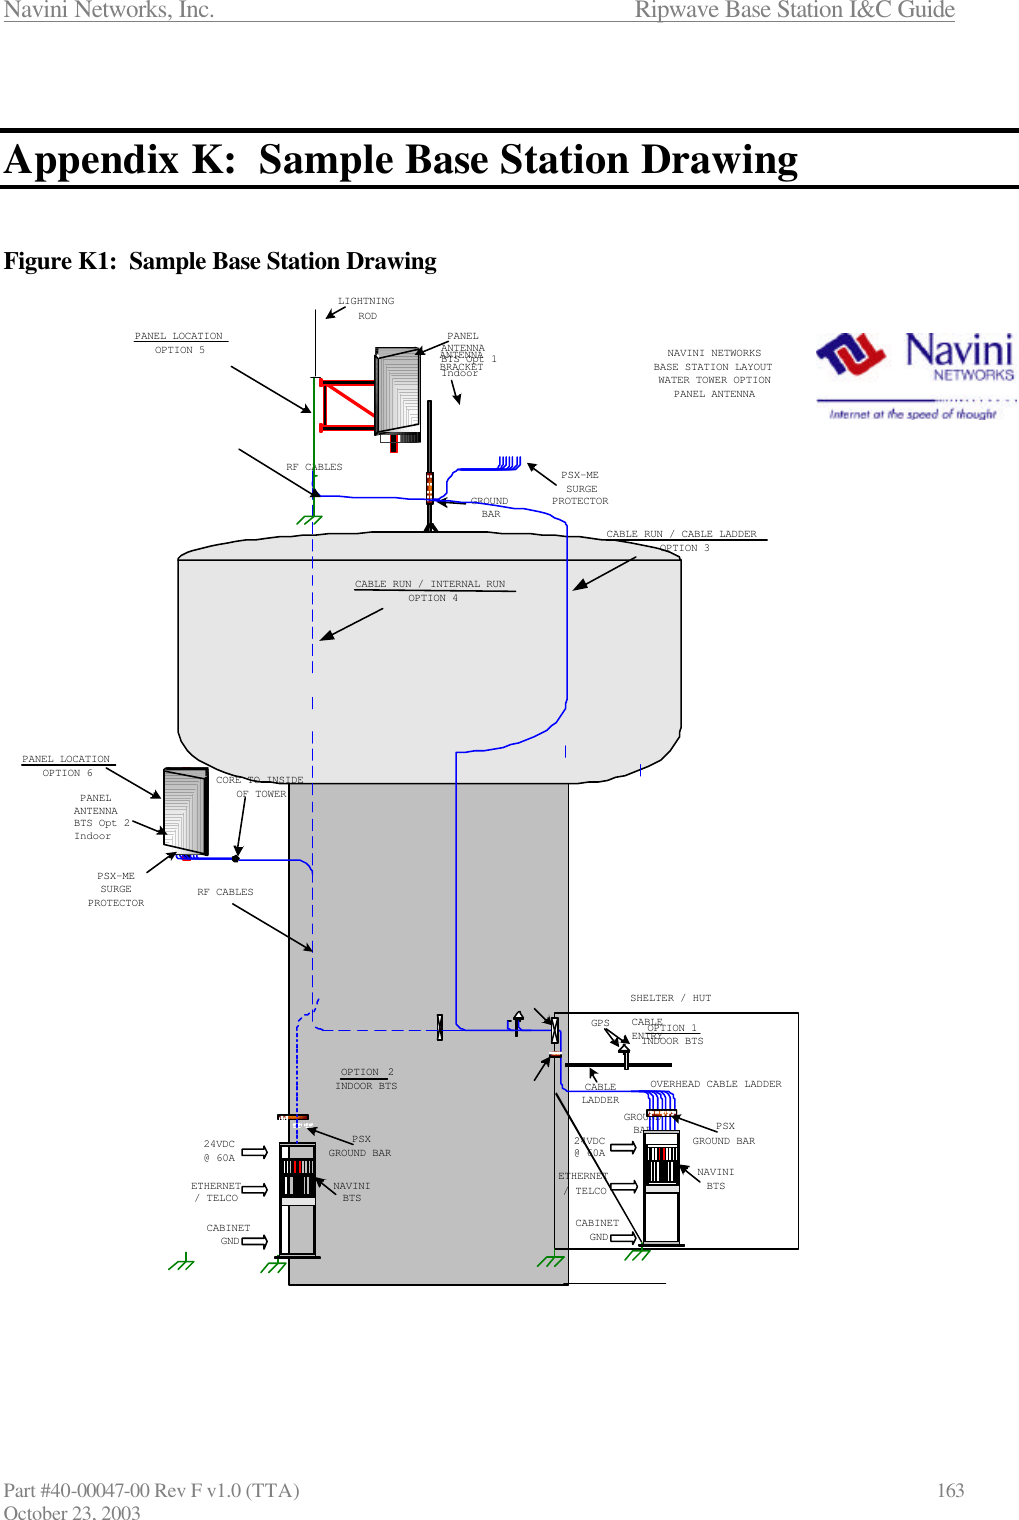 Navini Networks, Inc.                      Ripwave Base Station I&amp;C Guide Part #40-00047-00 Rev F v1.0 (TTA)                            163 October 23, 2003   Appendix K:  Sample Base Station Drawing   Figure K1:  Sample Base Station Drawing                                            NAVINI NETWORKS BASE STATION LAYOUT WATER TOWER OPTION PANEL ANTENNA PSX-ME SURGE PROTECTOR GROUND BAR RF CABLES ANTENNA BRACKET GPS CABLE LADDER CABLE ENTRY GROUND BAR ETHERNET / TELCO SHELTER / HUT OPTION 1 INDOOR BTS OVERHEAD CABLE LADDER 24VDC @ 60A CABINET GND PSX GROUND BAR NAVINI BTS 24VDC @ 60A CABINET GND PSX GROUND BAR NAVINI BTS ETHERNET / TELCO OPTION  2 INDOOR BTS CABLE RUN / CABLE LADDER OPTION 3 CABLE RUN / INTERNAL RUN OPTION 4 LIGHTNING ROD RF CABLES CORE TO INSIDE OF TOWER PANEL ANTENNA BTS Opt 1 Indoor PANEL ANTENNA BTS Opt 2 Indoor  PSX-ME SURGE PROTECTOR PANEL LOCATION OPTION 5 PANEL LOCATION OPTION 6 